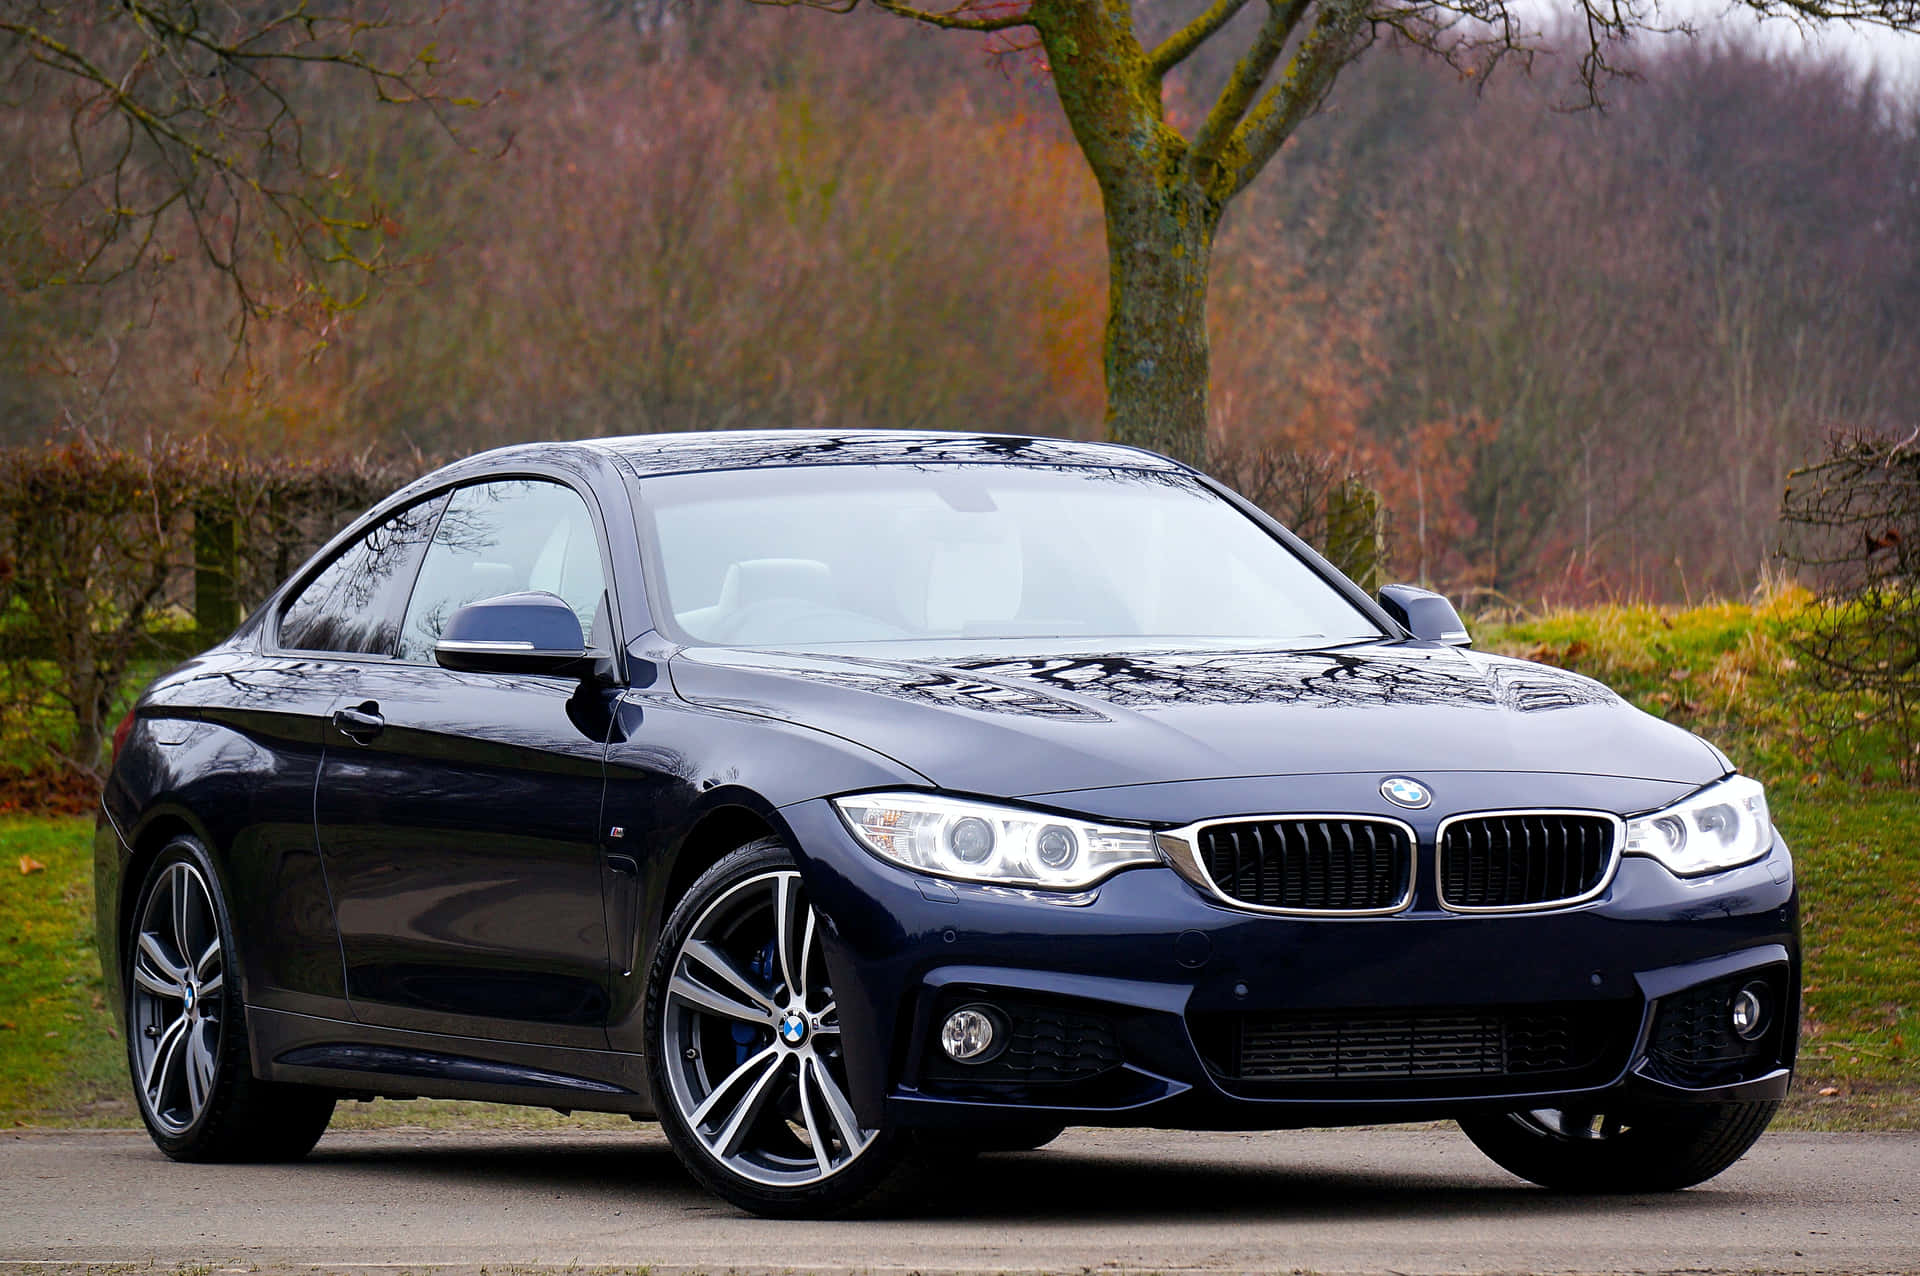 "The BMW 440i - Luxury and Performance Combined" Wallpaper